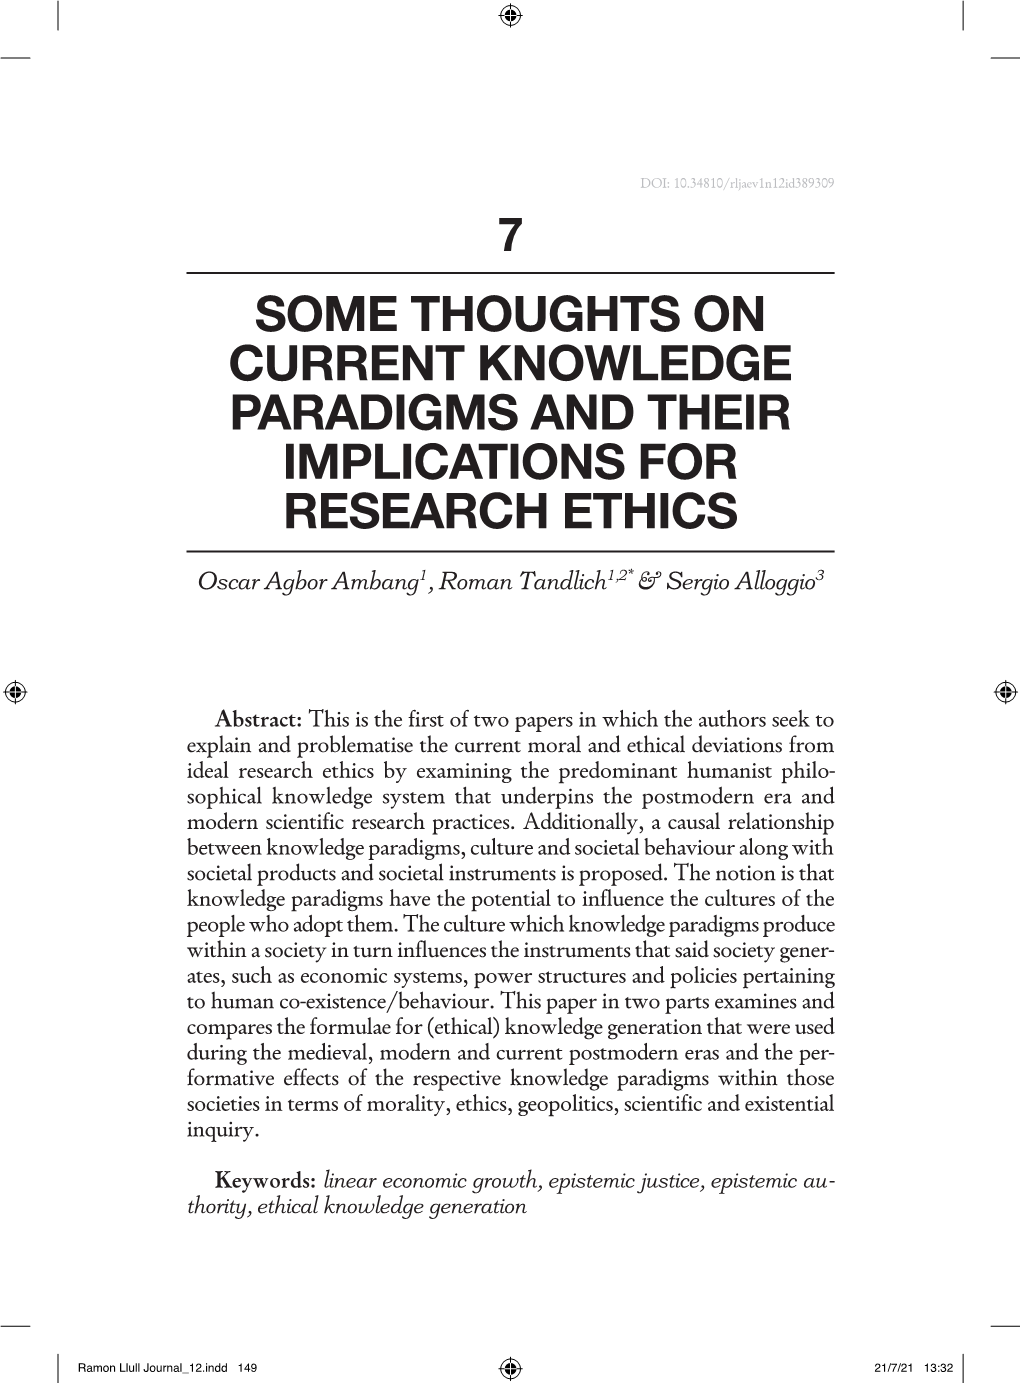 Some Thoughts on Current Knowledge Paradigms and Their Implications for Research Ethics